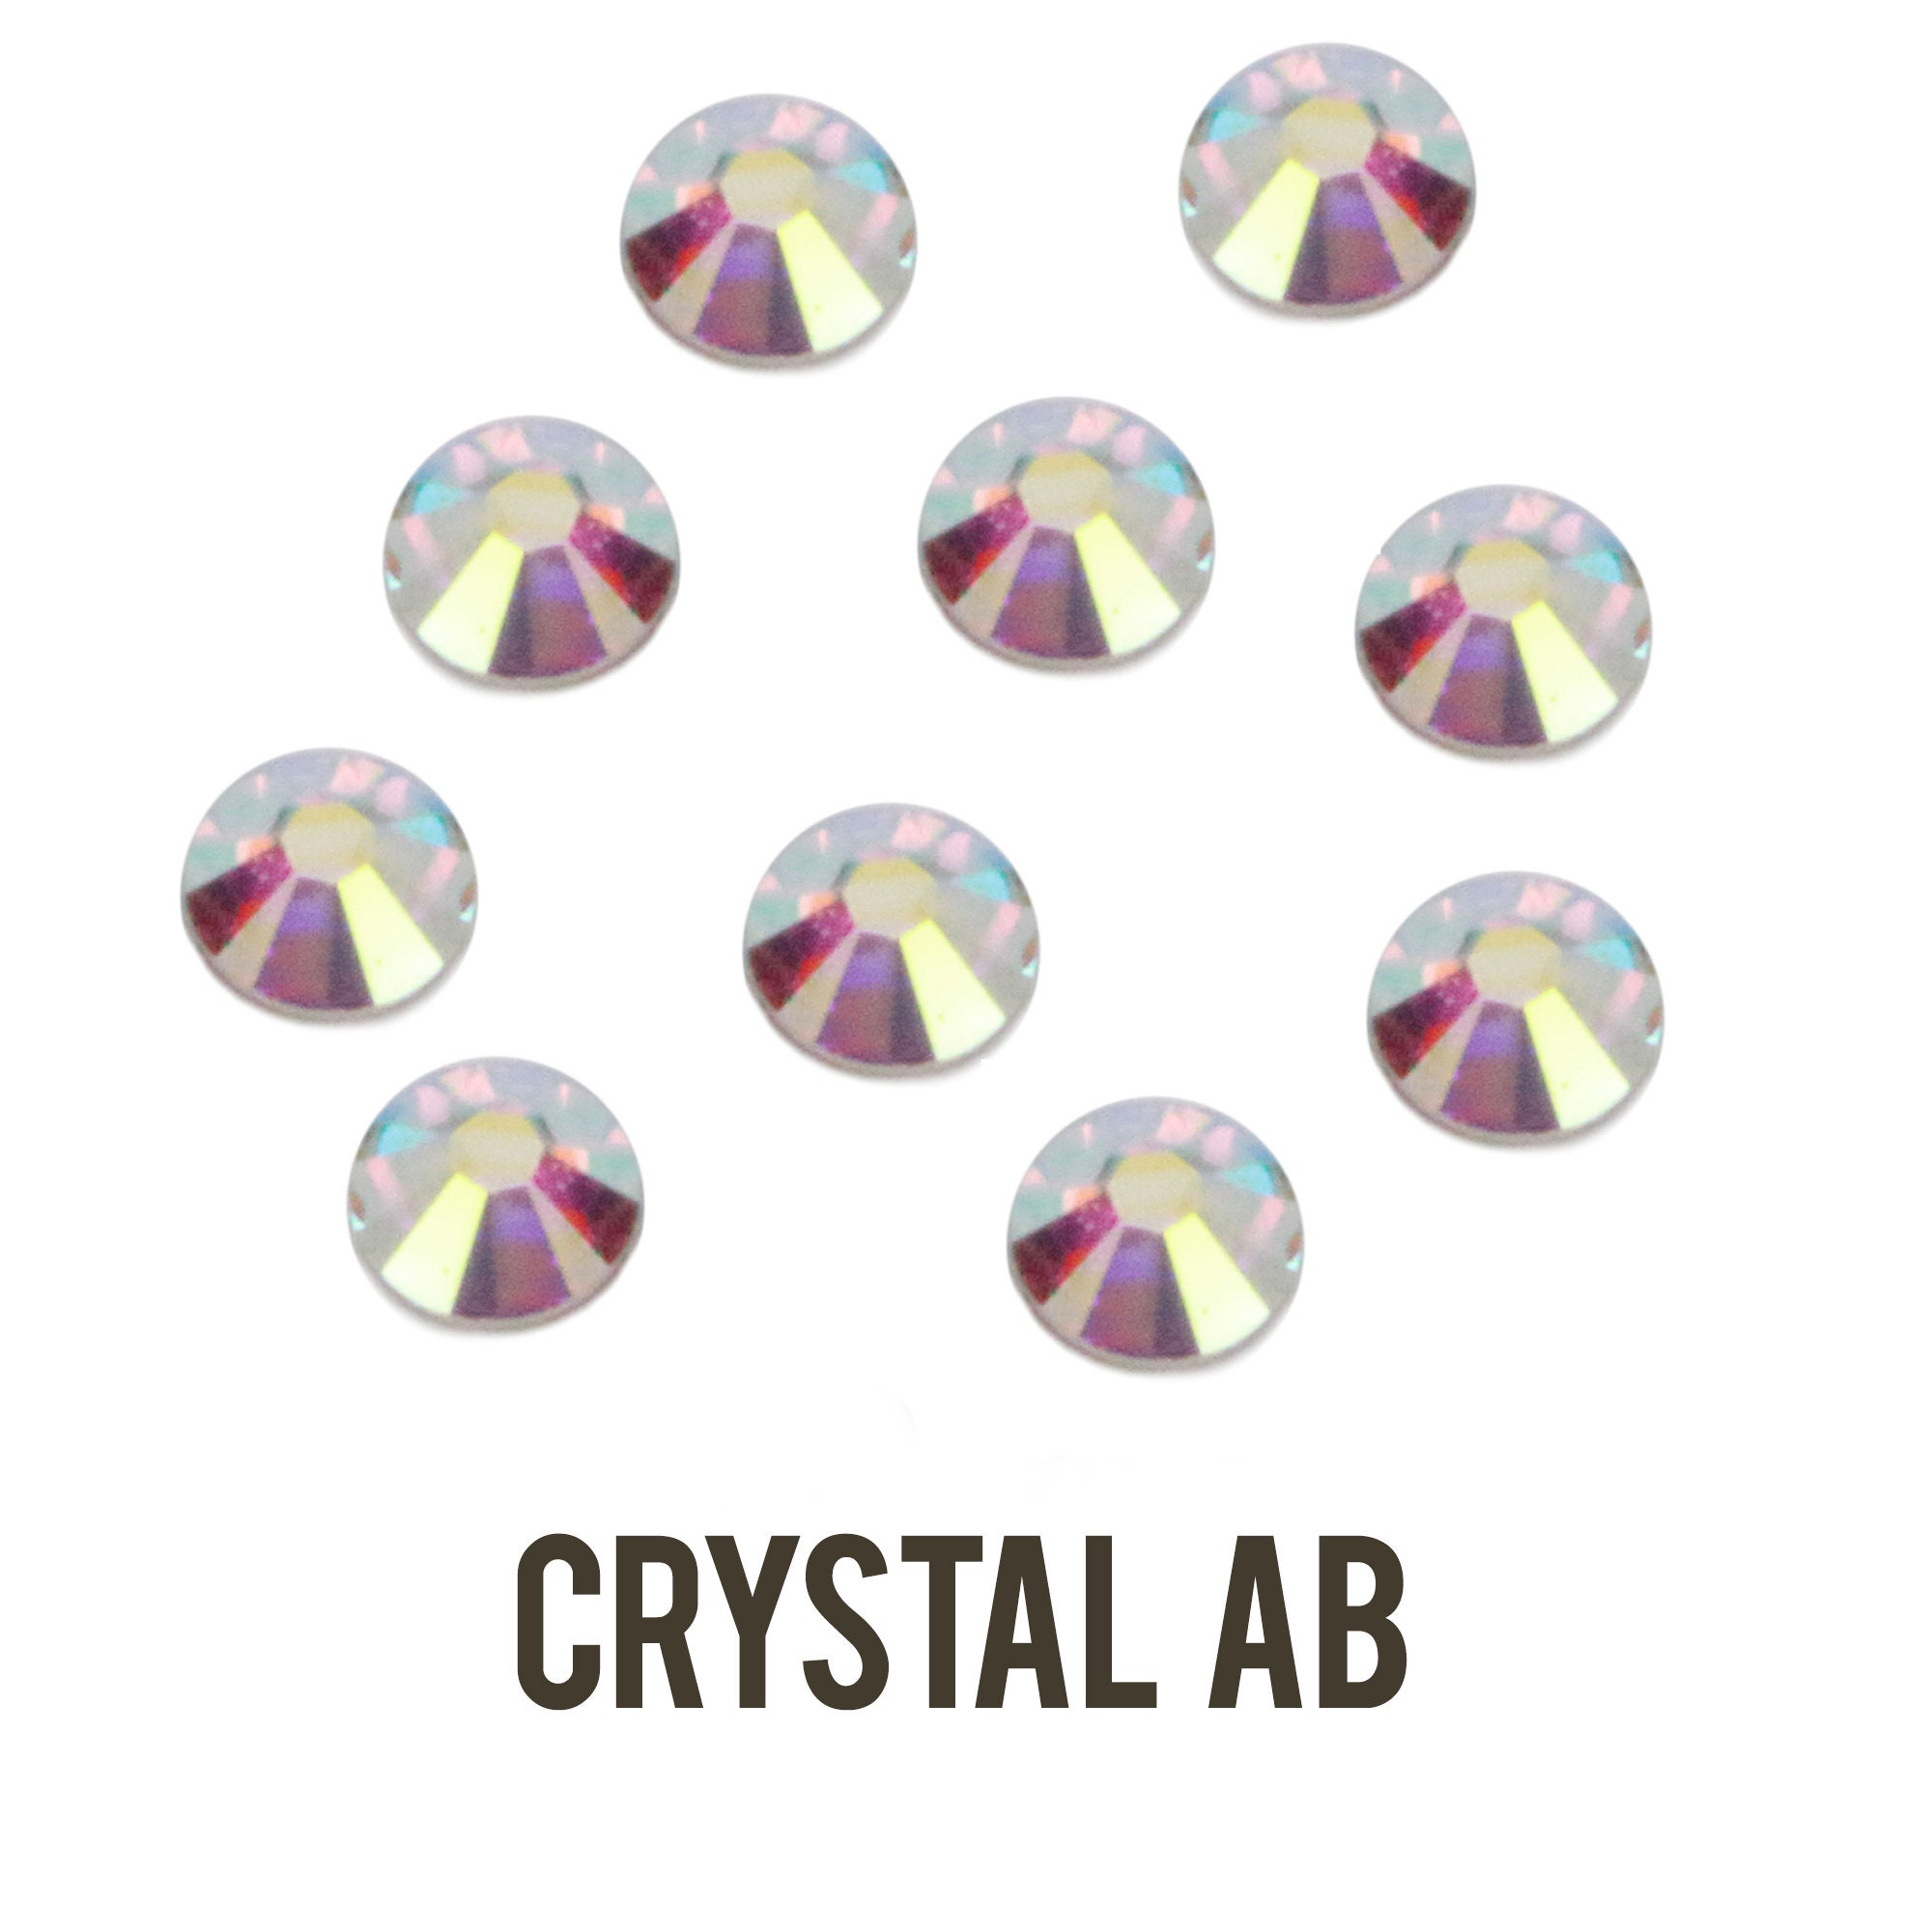 3.8mm Flat Back Crystals, Multi Pack of Birthstone Colors (240